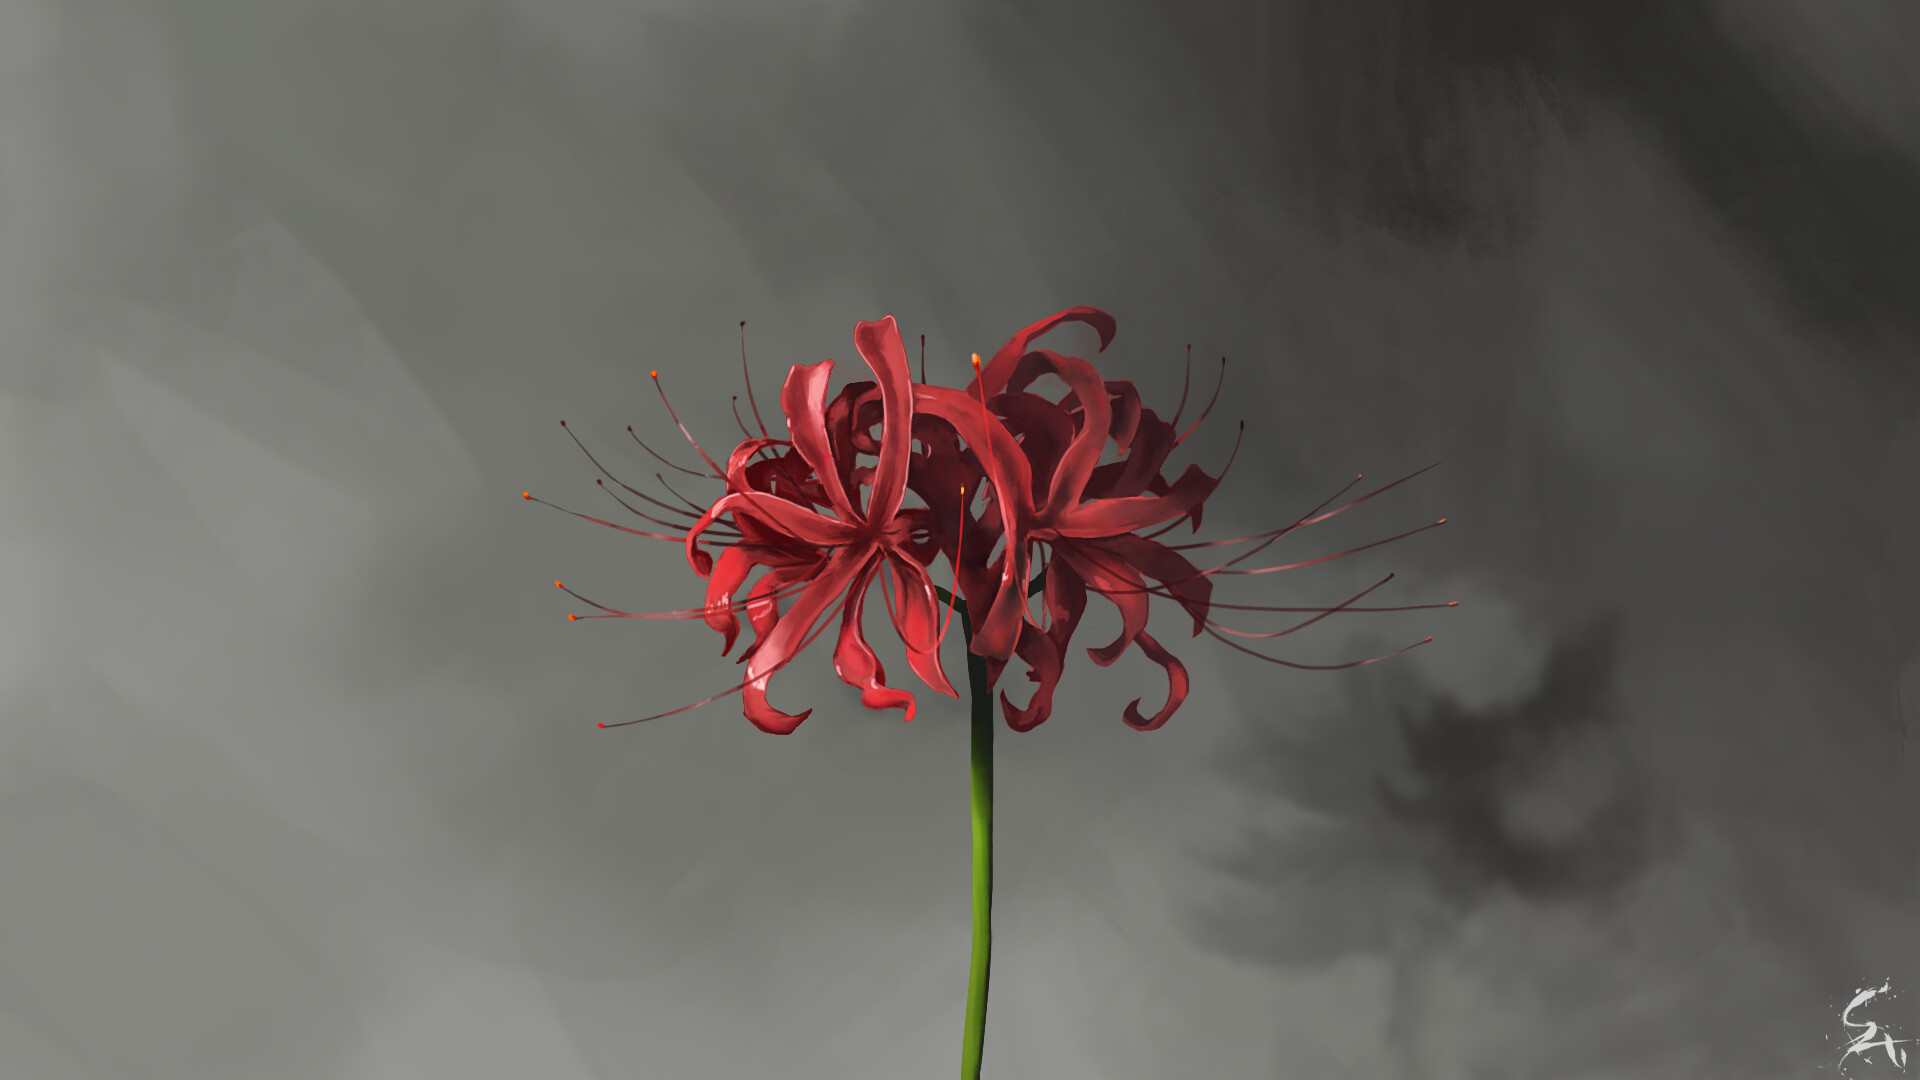 24 Anime Red Spider Lily Wallpaper Sachi Wallpaper